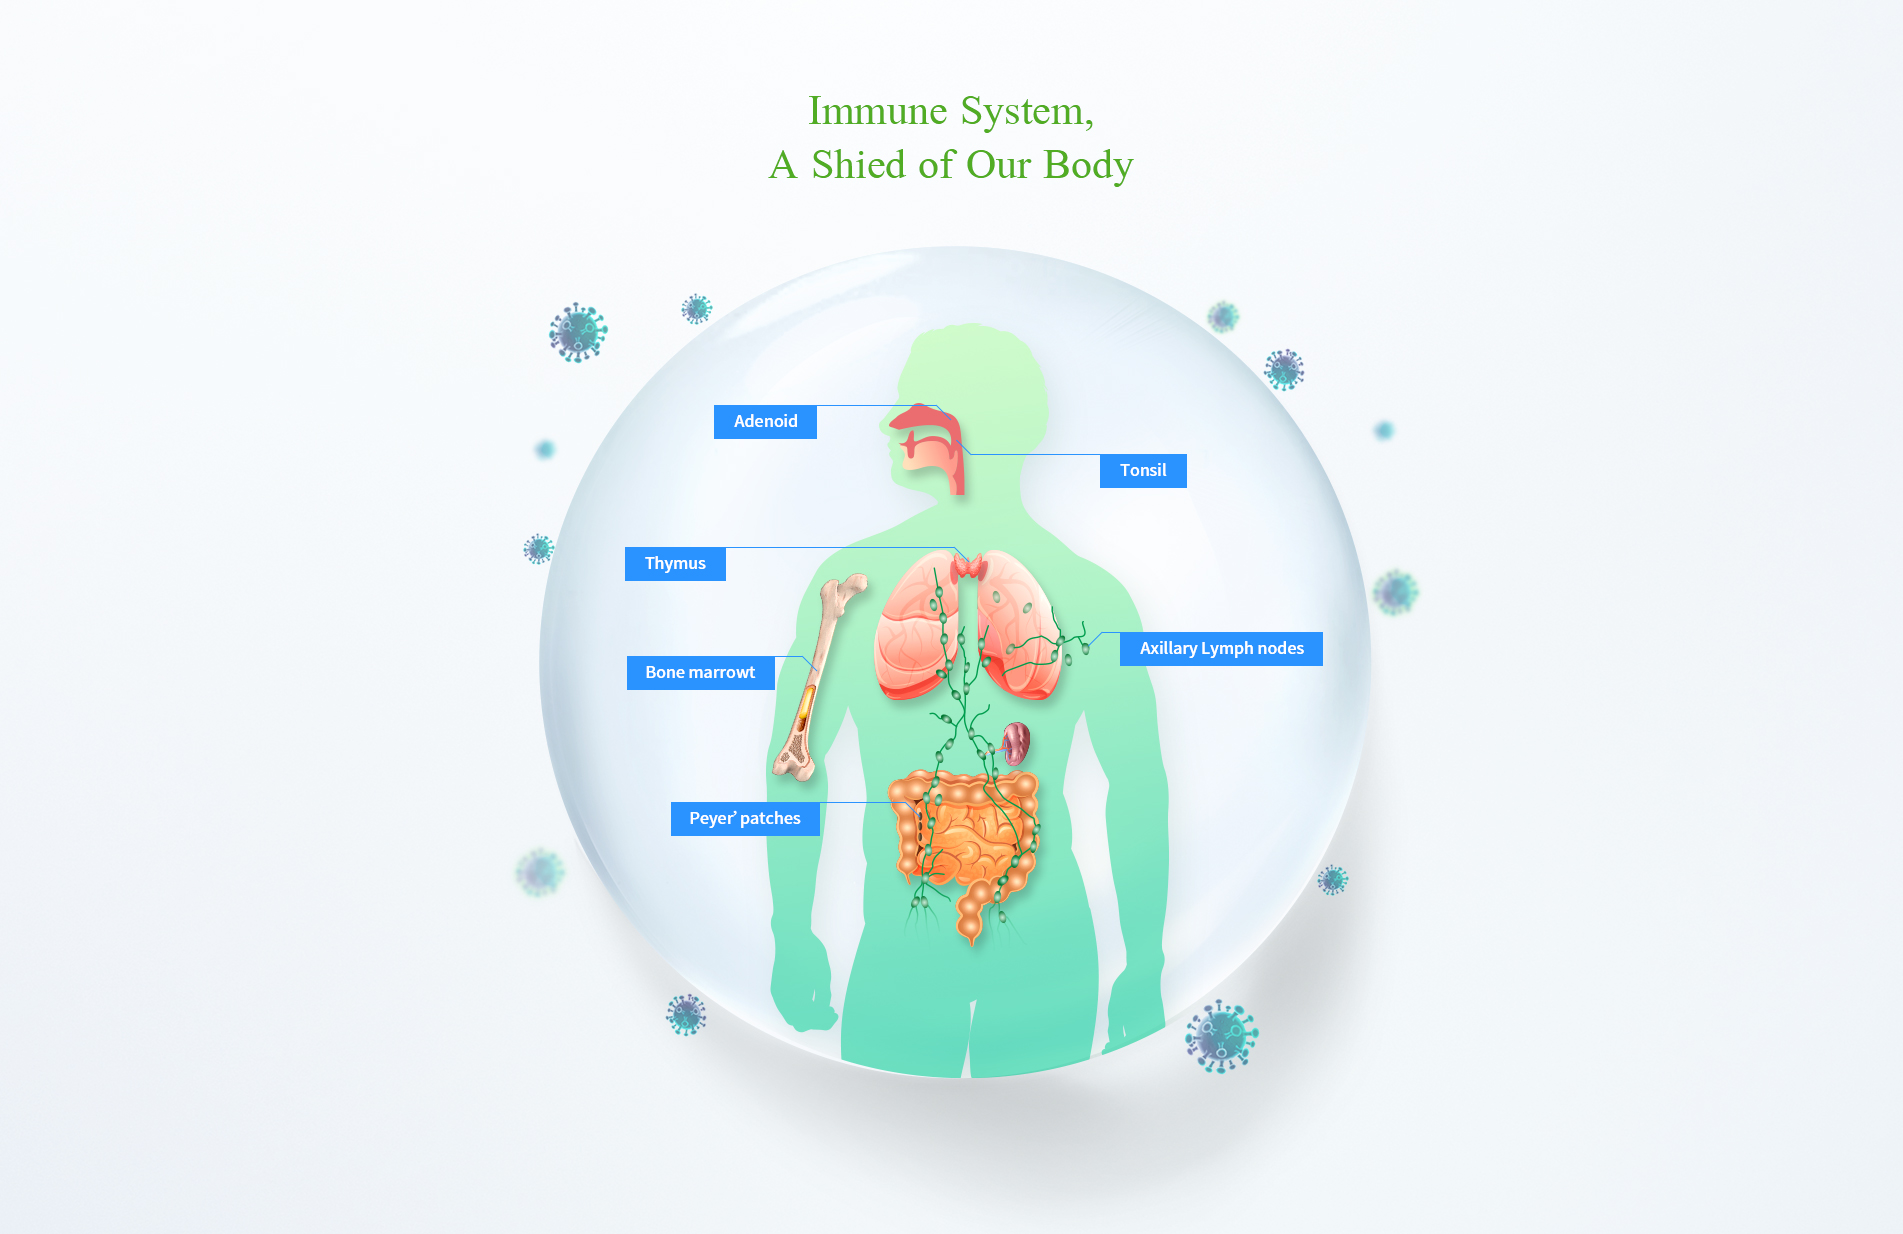 Immune System, A Shied of Our Body